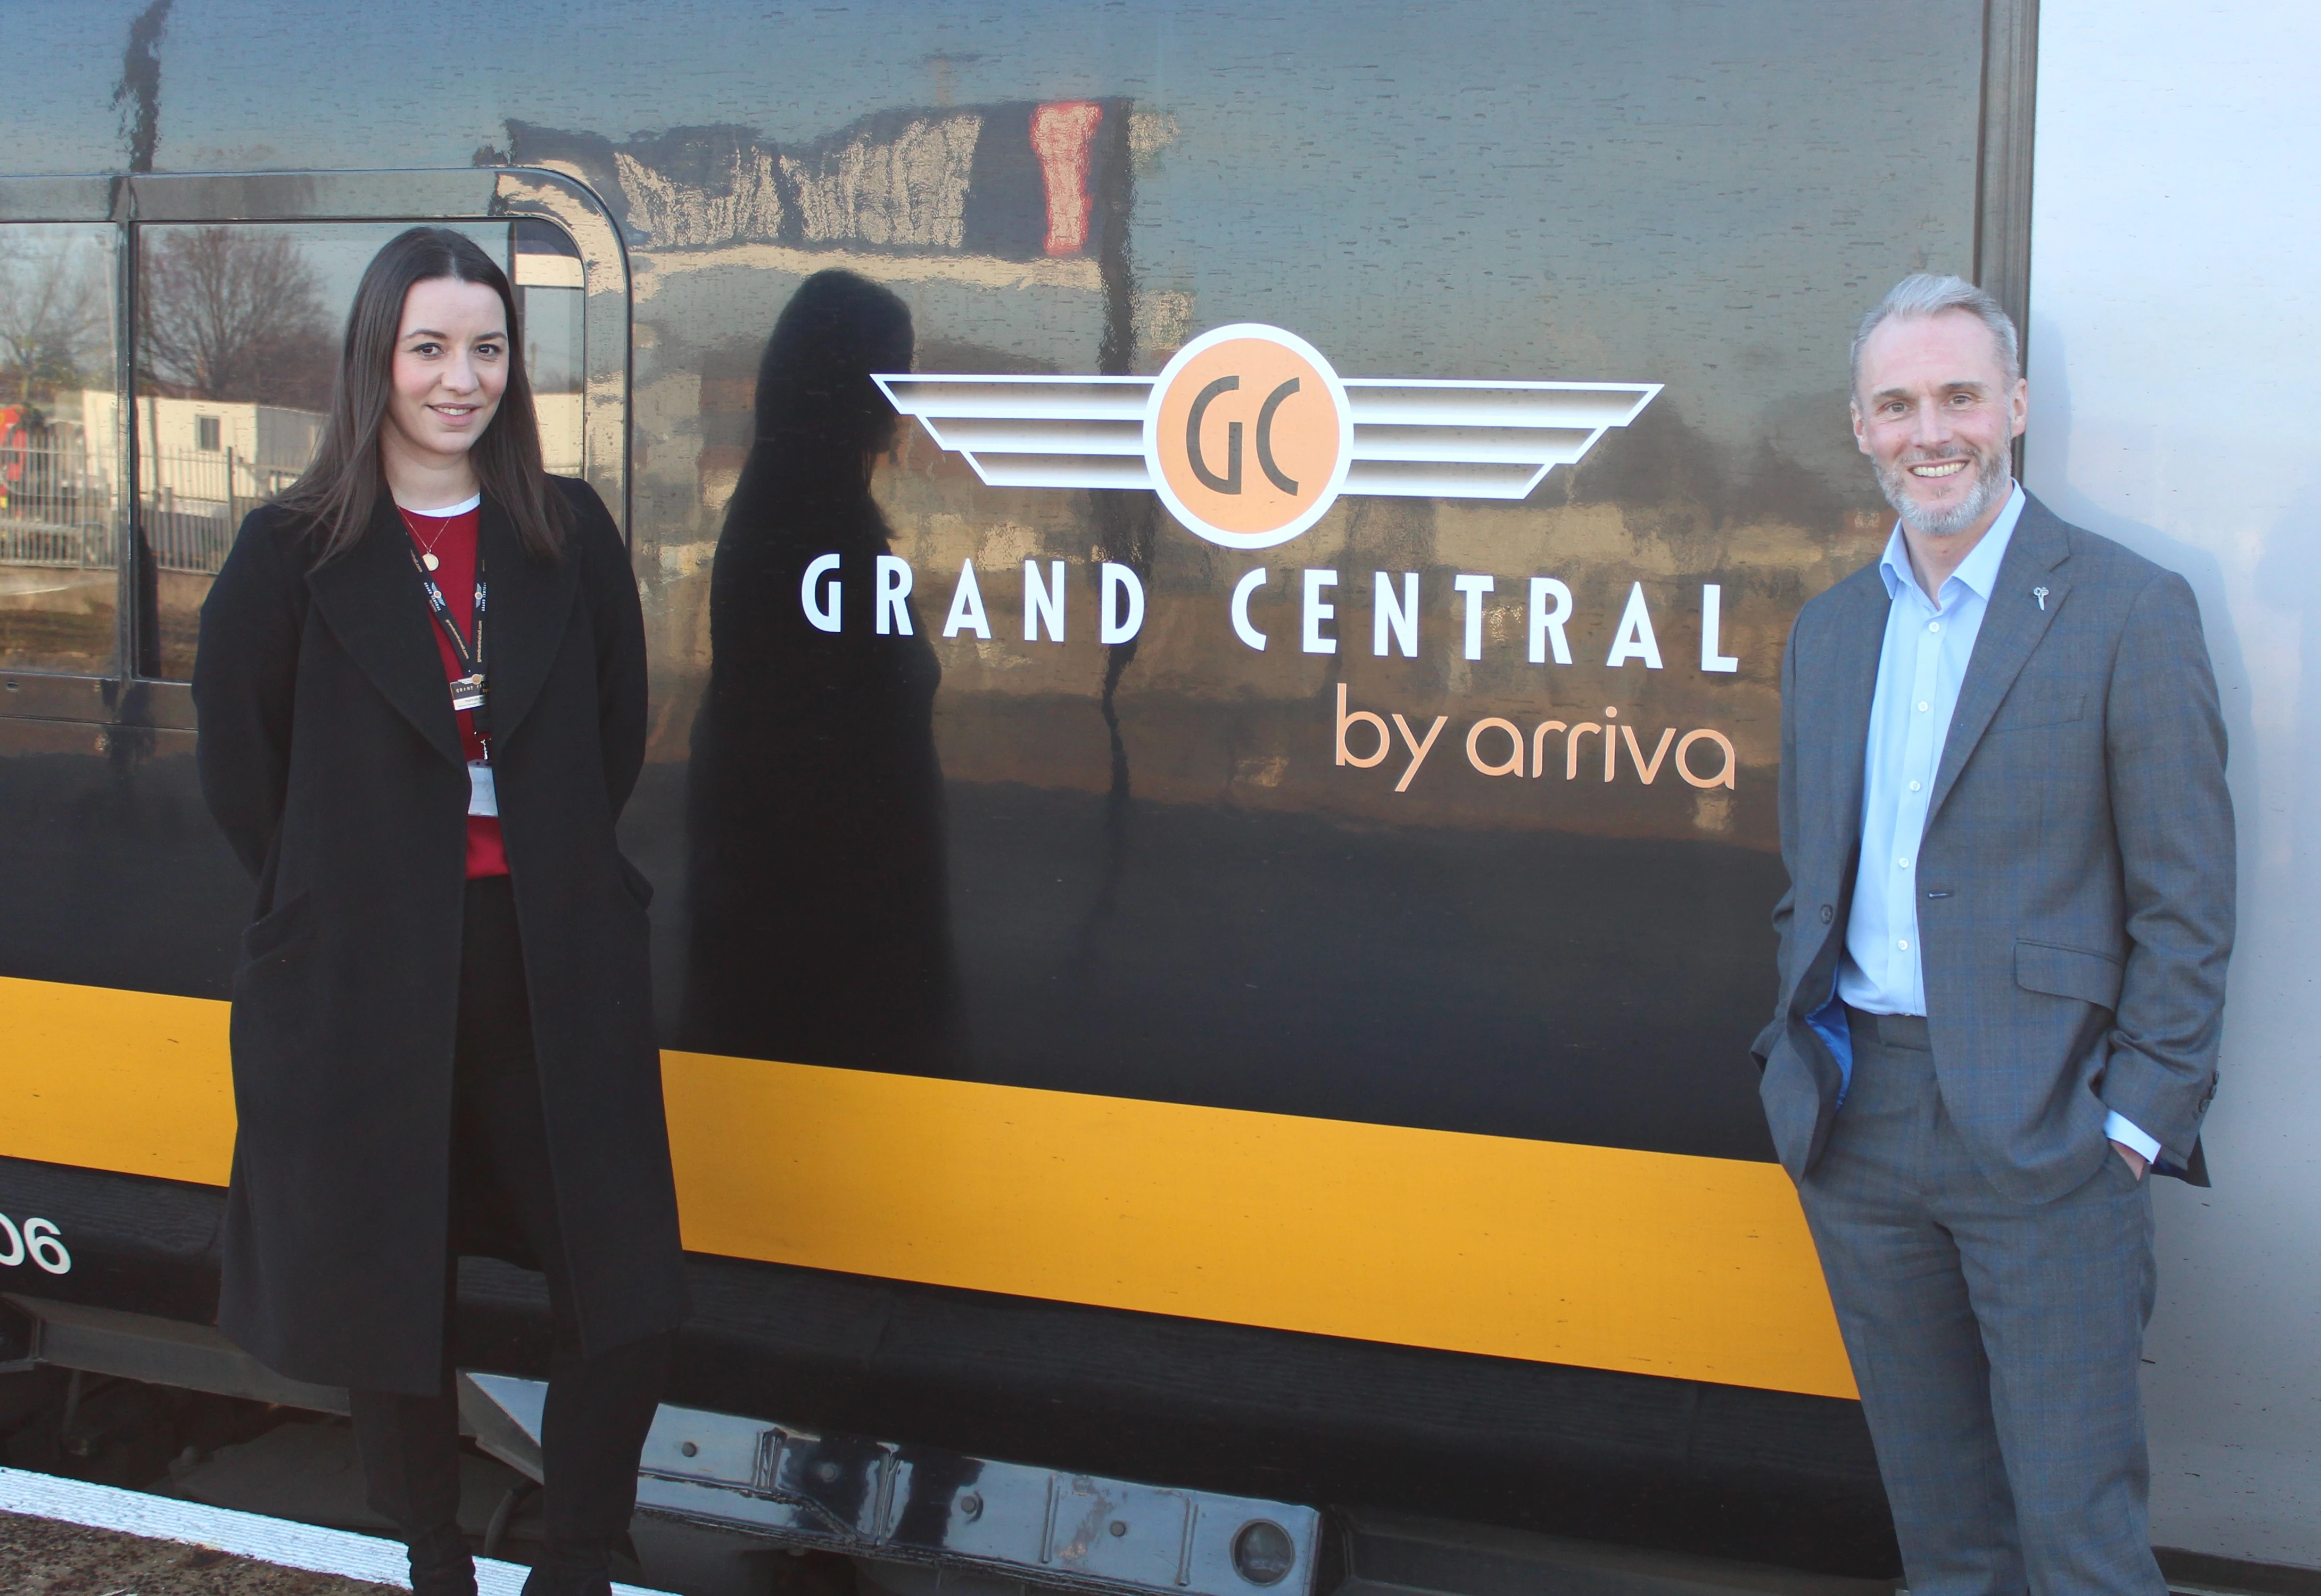 Hannah Bromage (Delivery Manager Community and Stations for Grand Central) with John Williams (Commercial Director for FC Halifax Town).